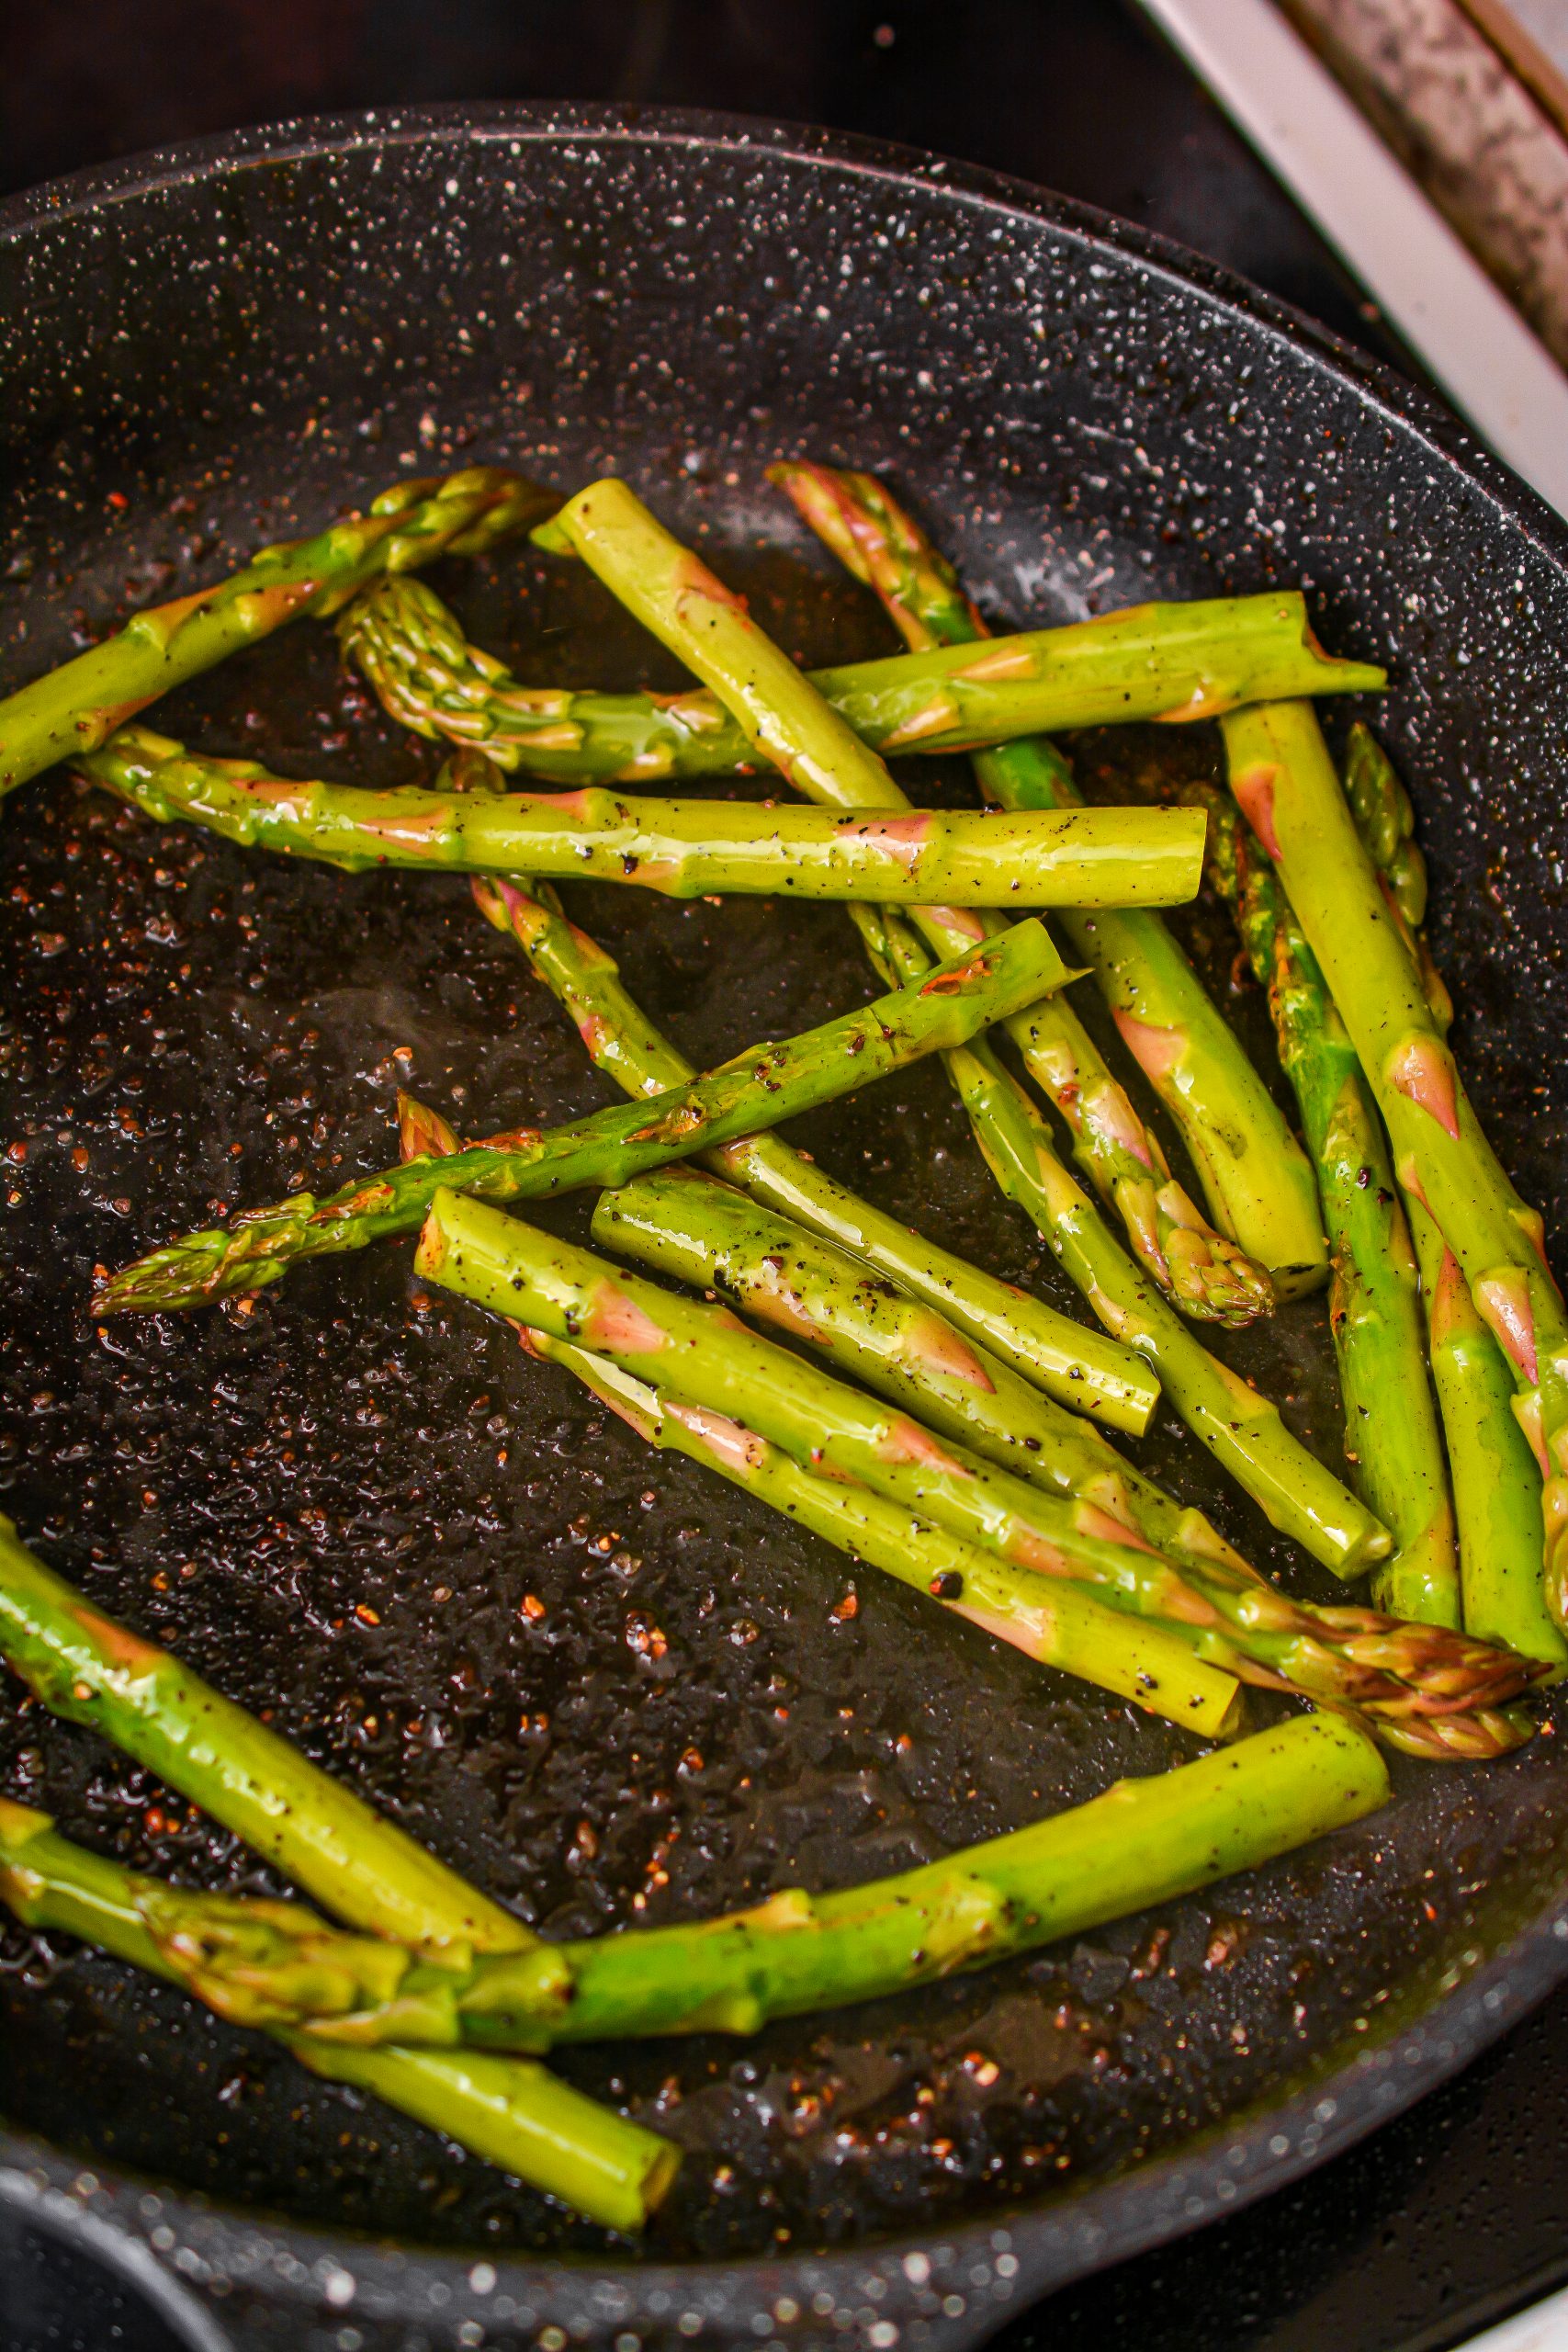 Place the asparagus in the skillet, turn the heat down to medium, place the lid on, and cook until becoming tender. Season with salt, pepper, and oregano